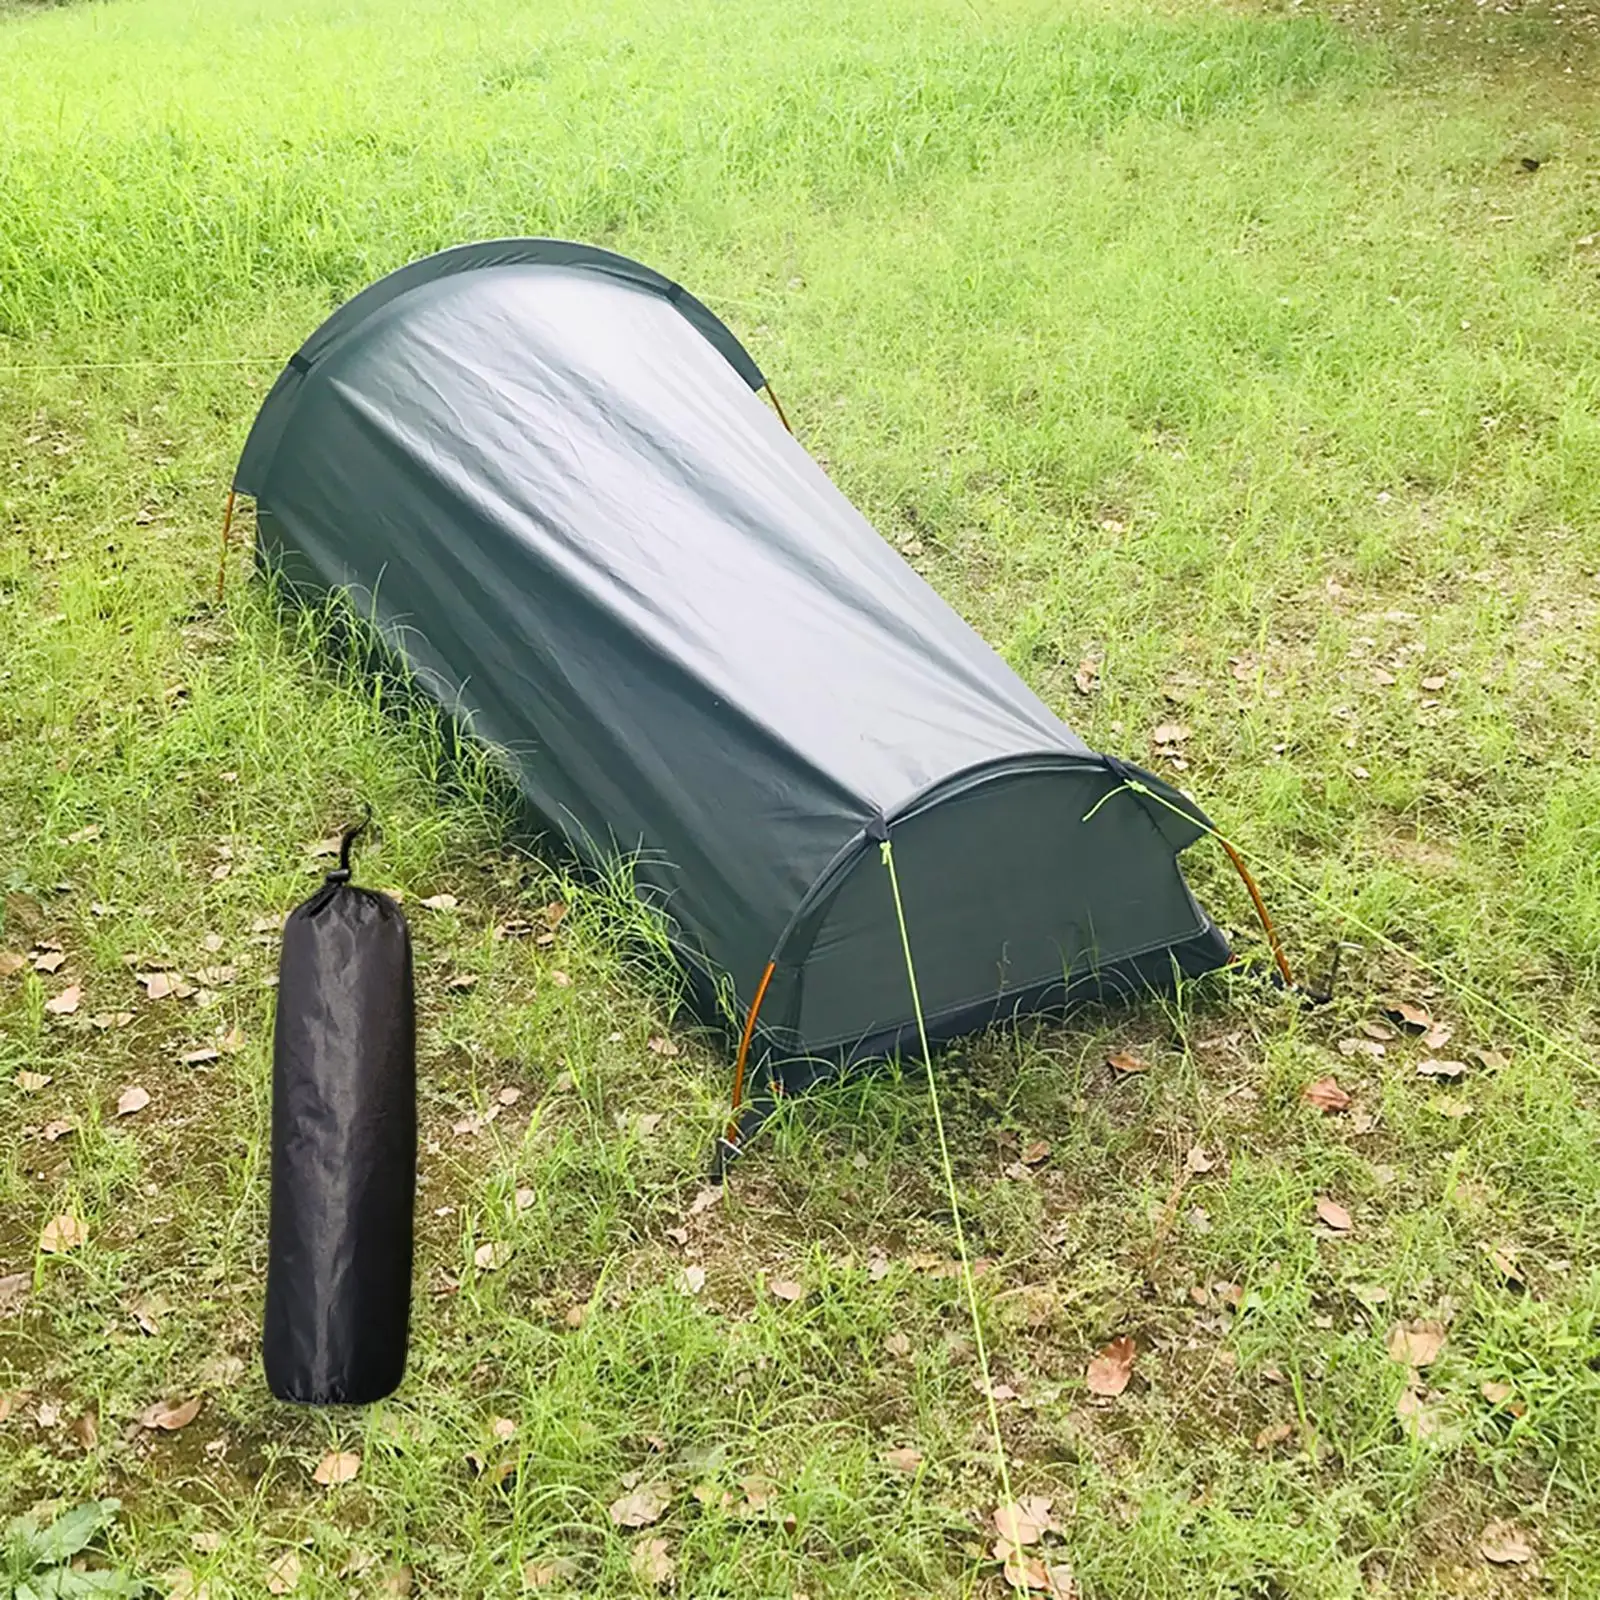 Camping Tent Waterproof Outdoor Activities Hiking Single Person Fishing